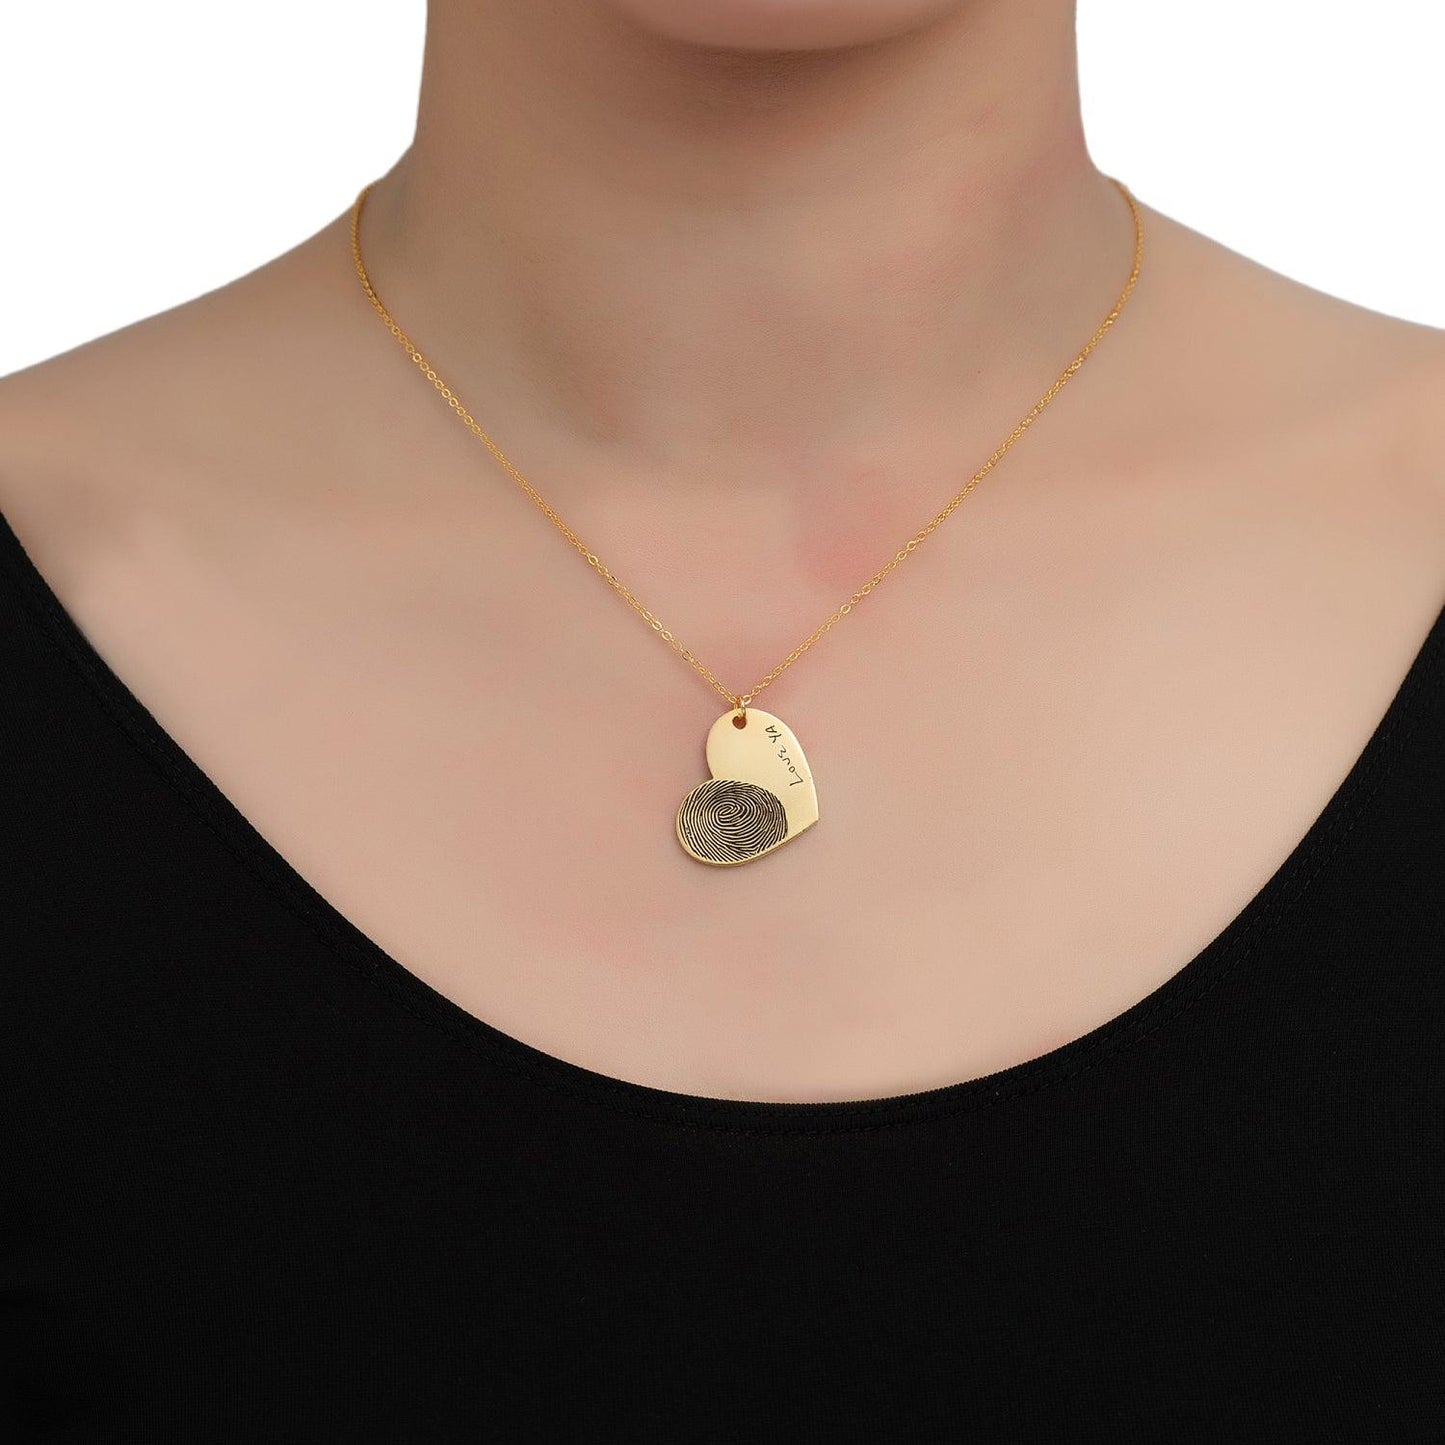 N11.Simple Engraved Heart Necklace - Elle Royal Jewelry